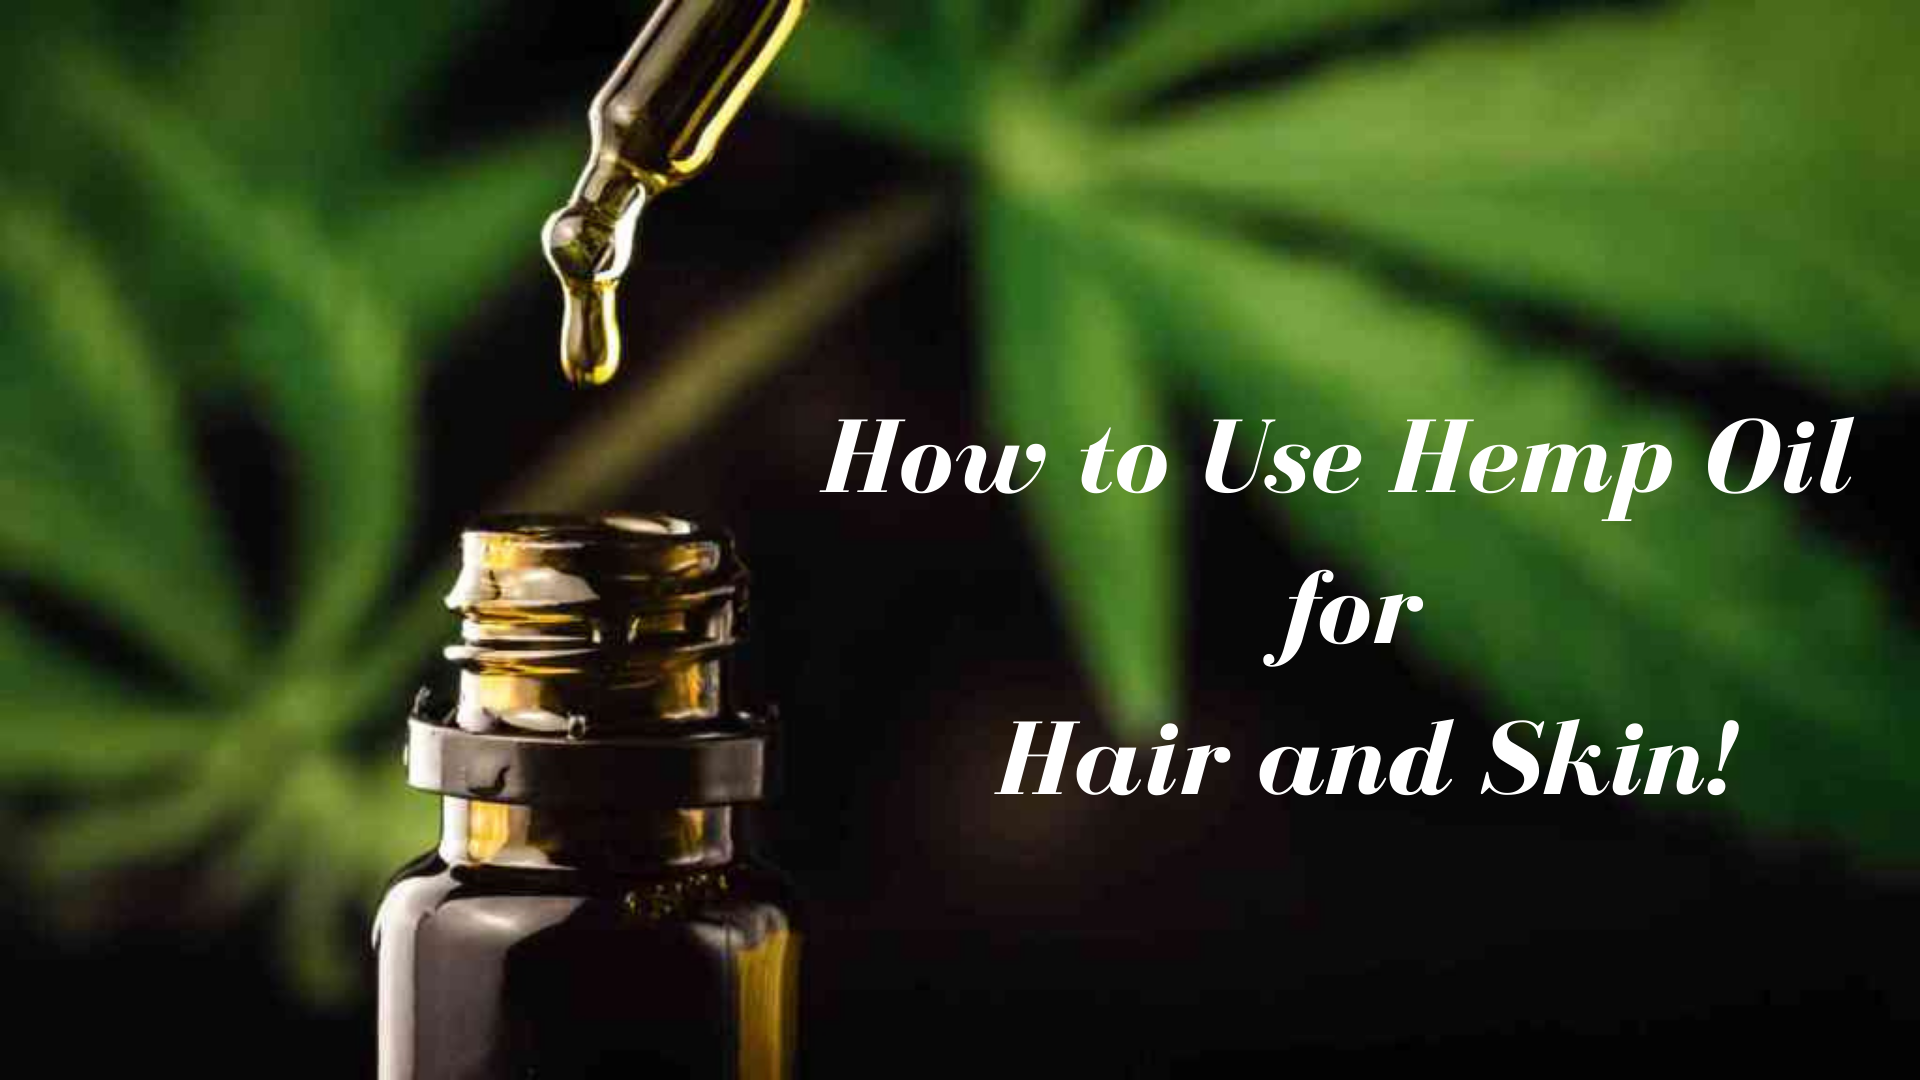 How to Use Hemp Oil for Hair and Skin!